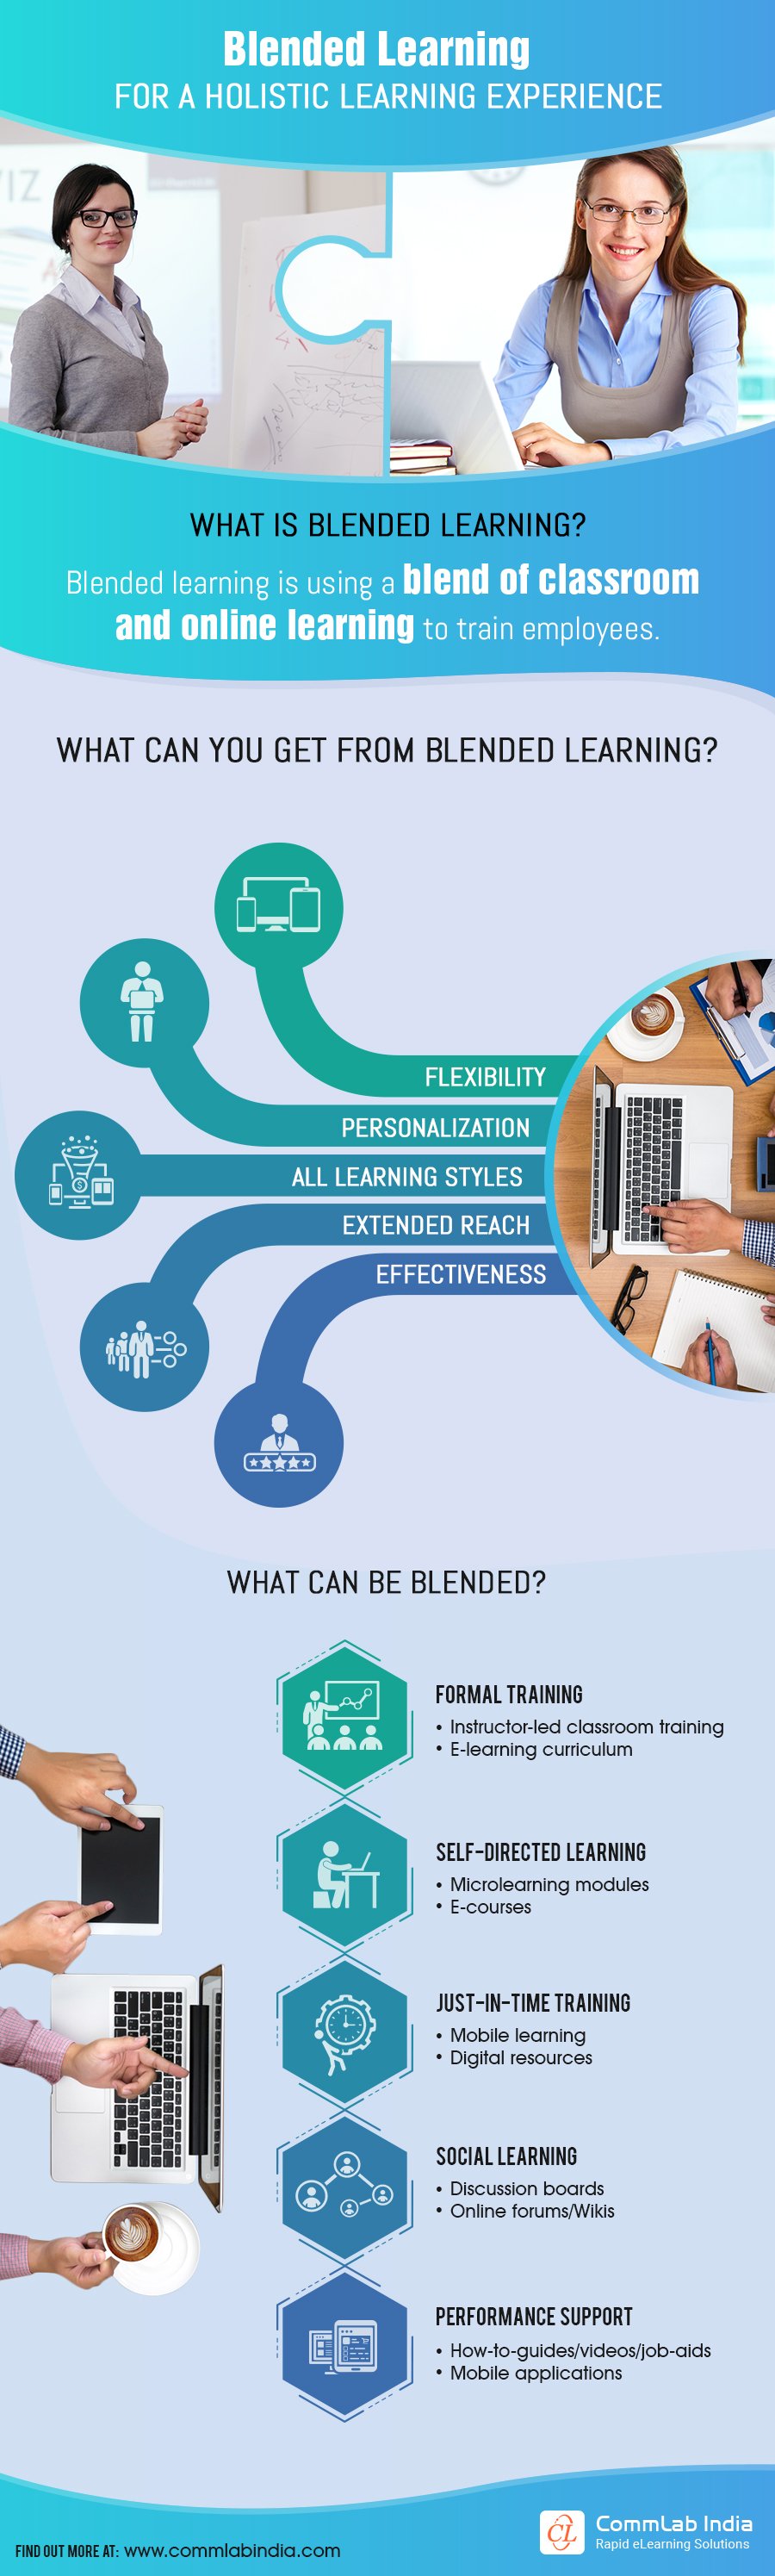 Blended Learning for a Holistic Learning Experience [Infographic]